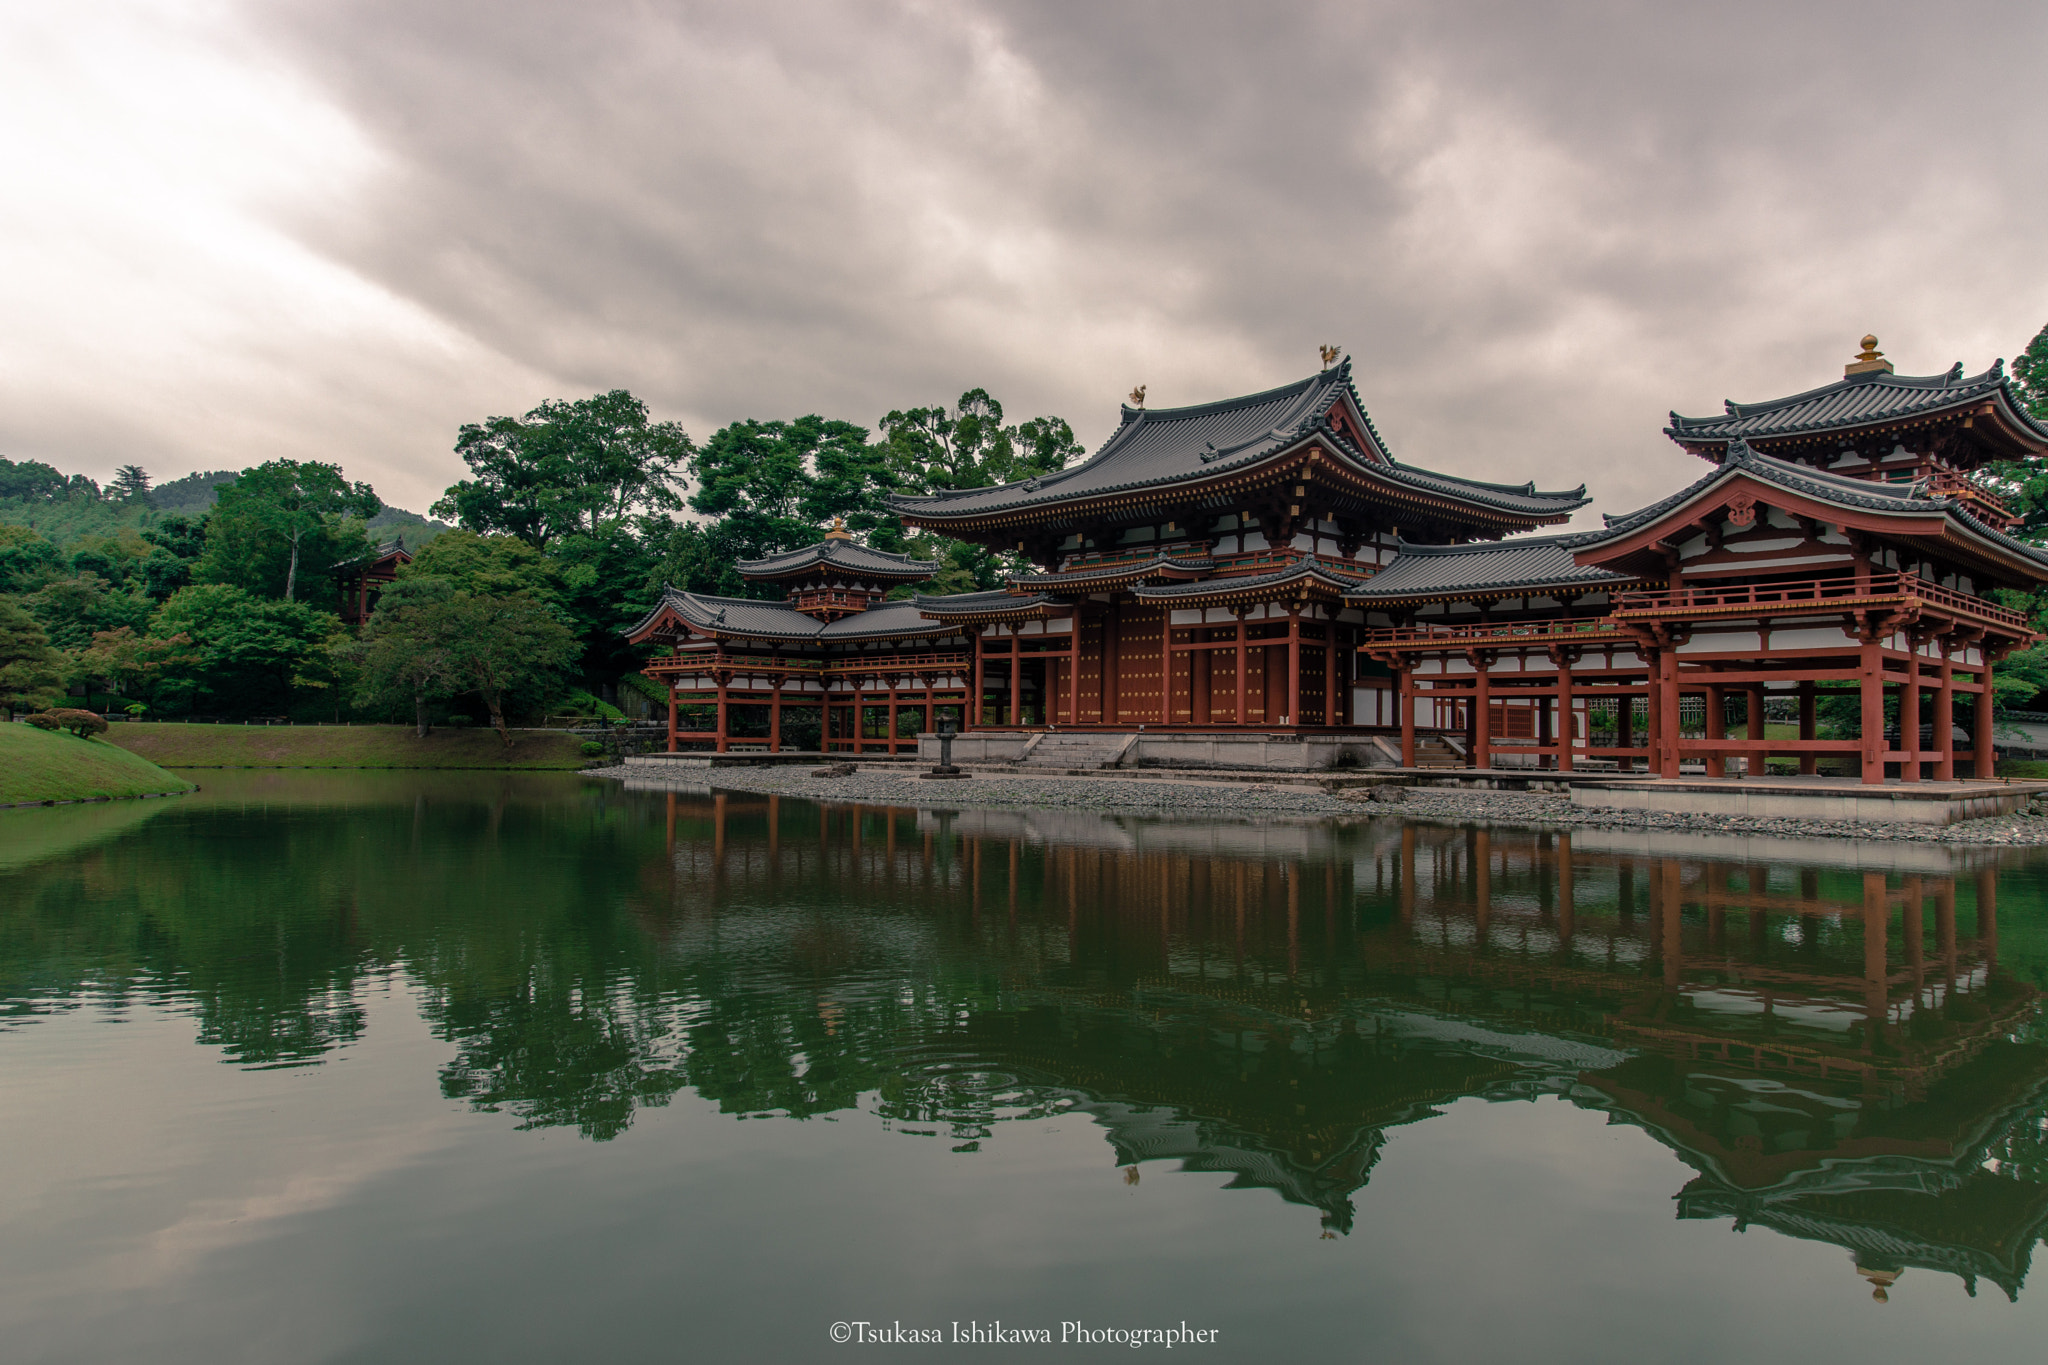 Sony a99 II sample photo. The phoenix hall of byodo-in photography